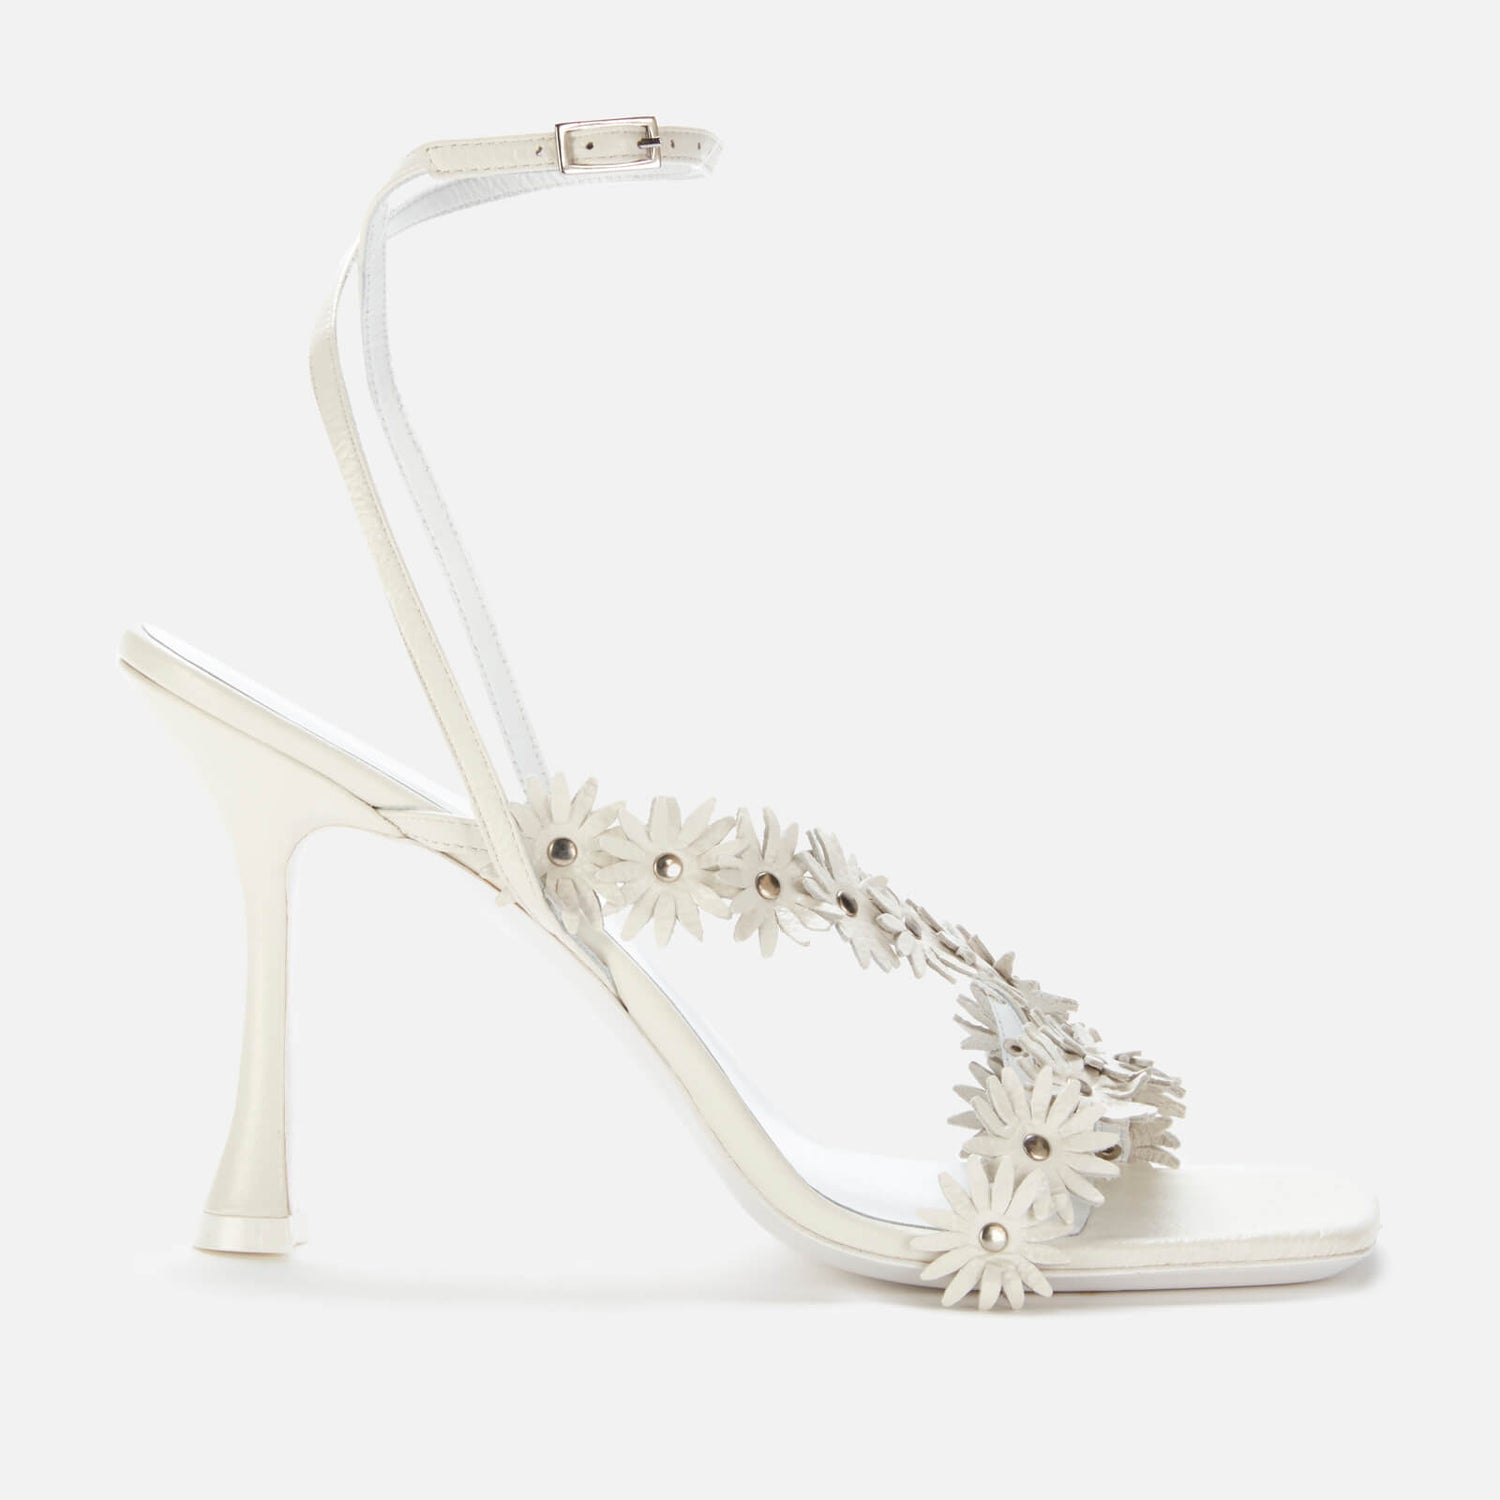 BY FAR Women's Poppy Leather Heeled Sandals - White - UK 3